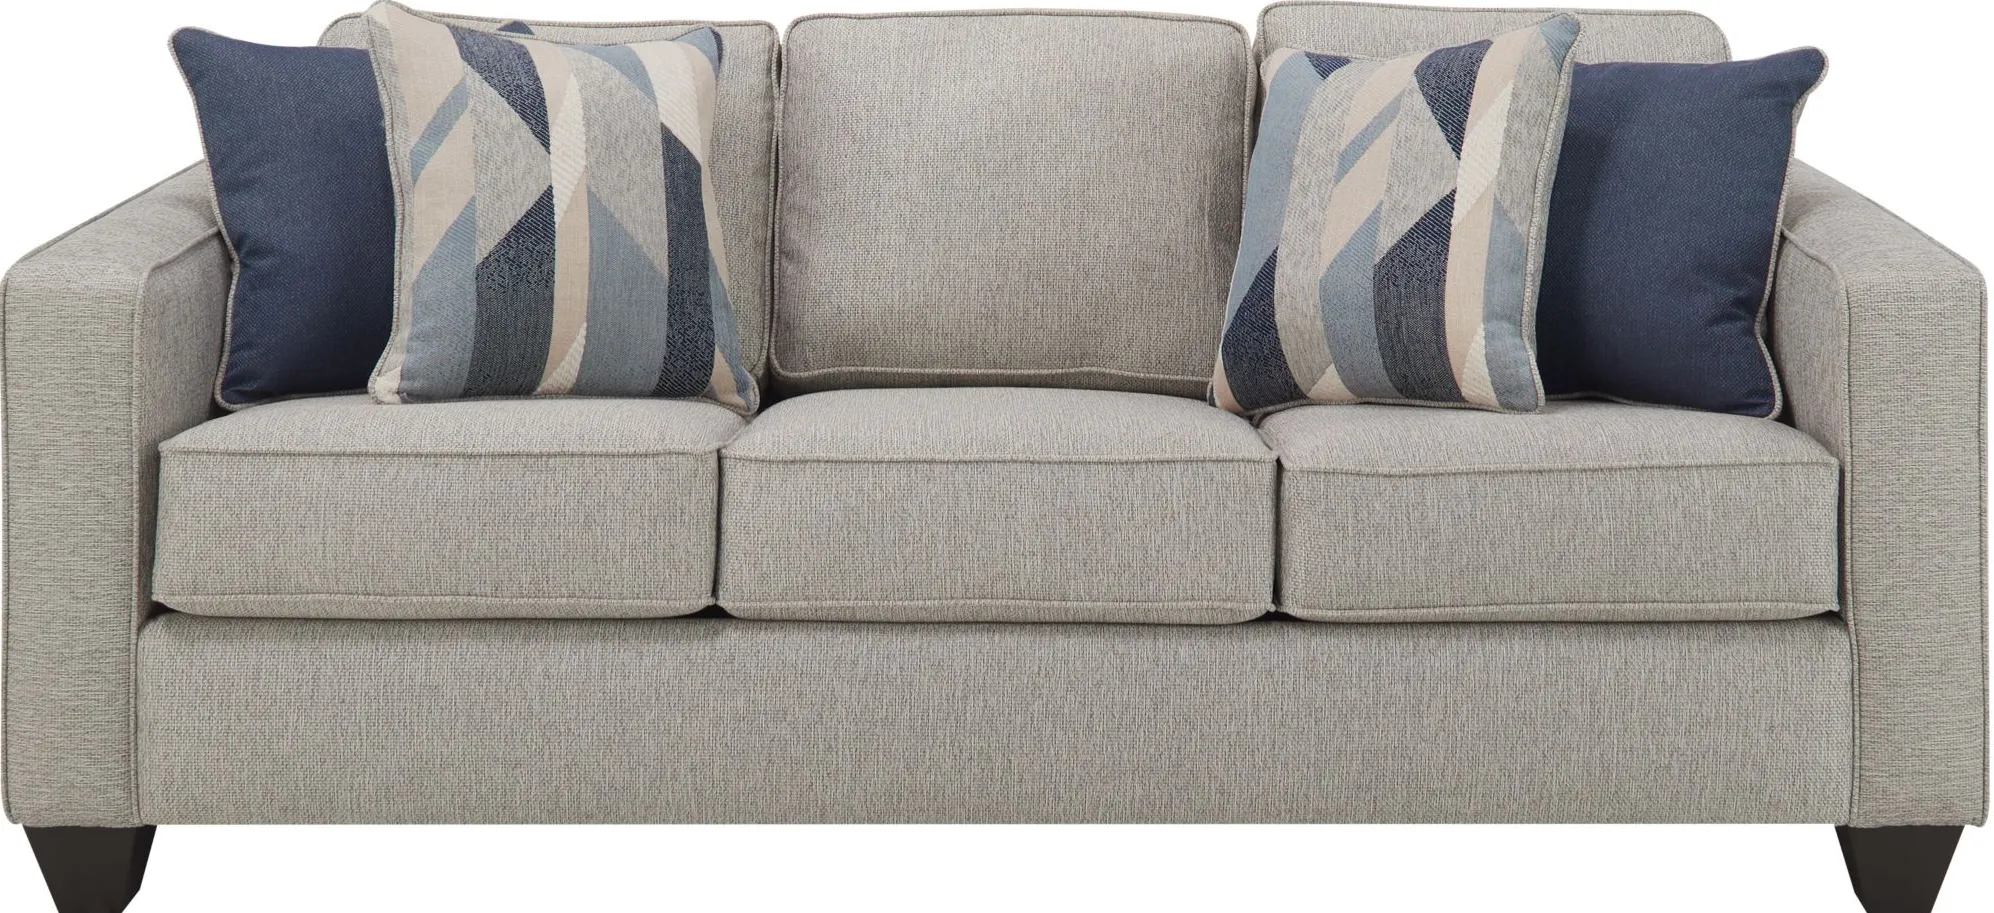 Odelle Queen Sleeper Sofa in Gray by Albany Furniture